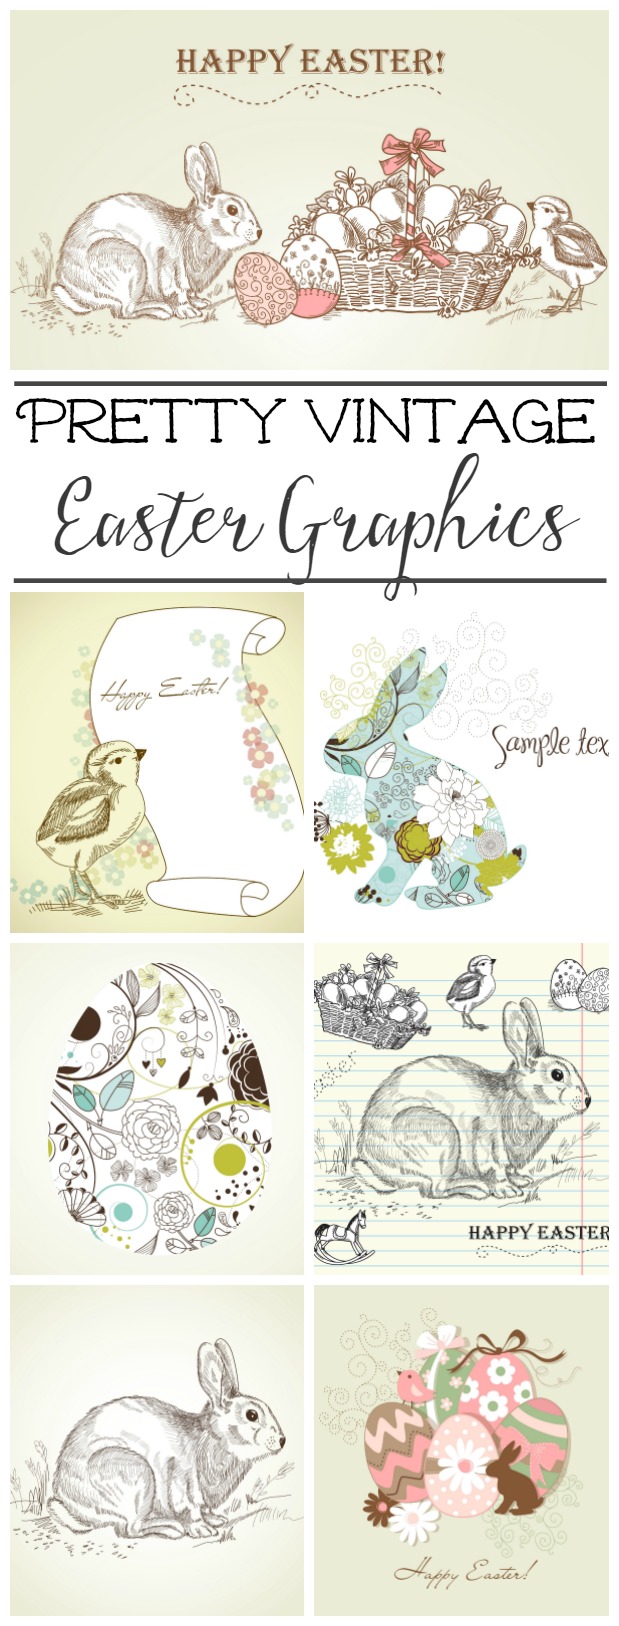 Pretty vintage Easter graphics. Great for Easter cards, tags and printables!